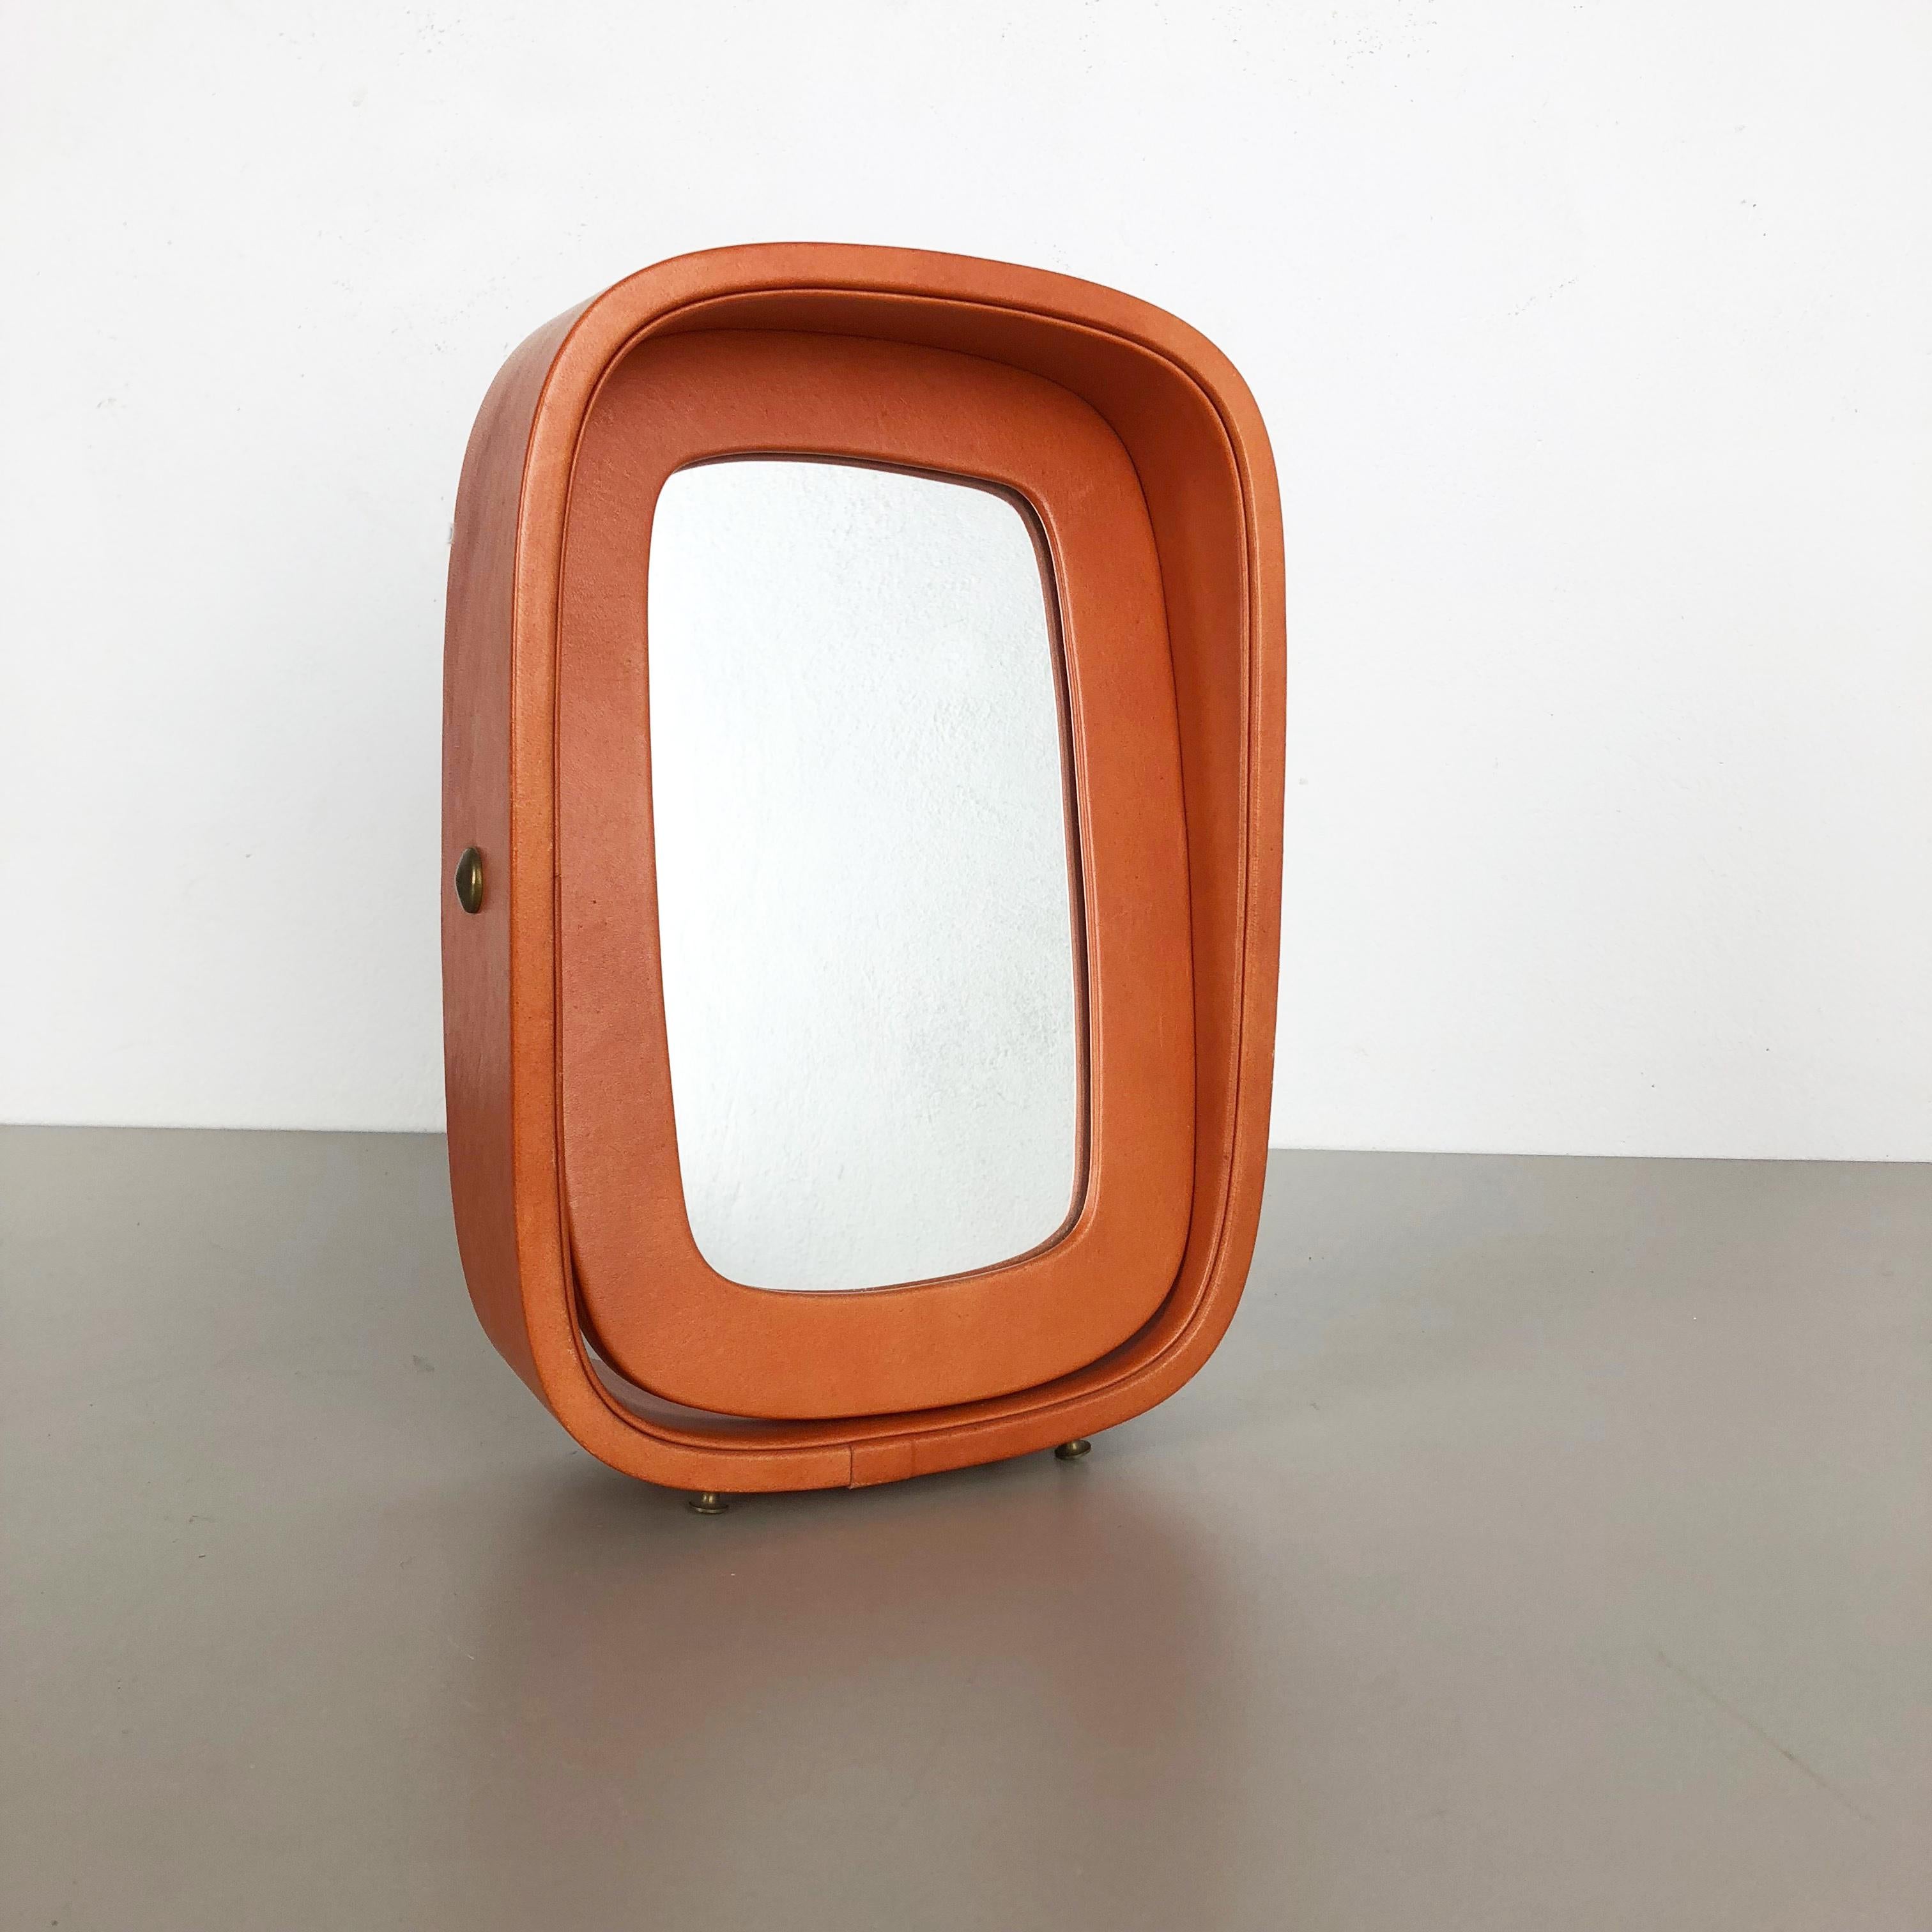 Article:

Table mirror


Producer:

Vereinigte Werkstätten München attrib.


Origin:

Germany


Material:

Wood, glass, leather


Decade:

1960s


Description:

This original midcentury table mirror was produced in the